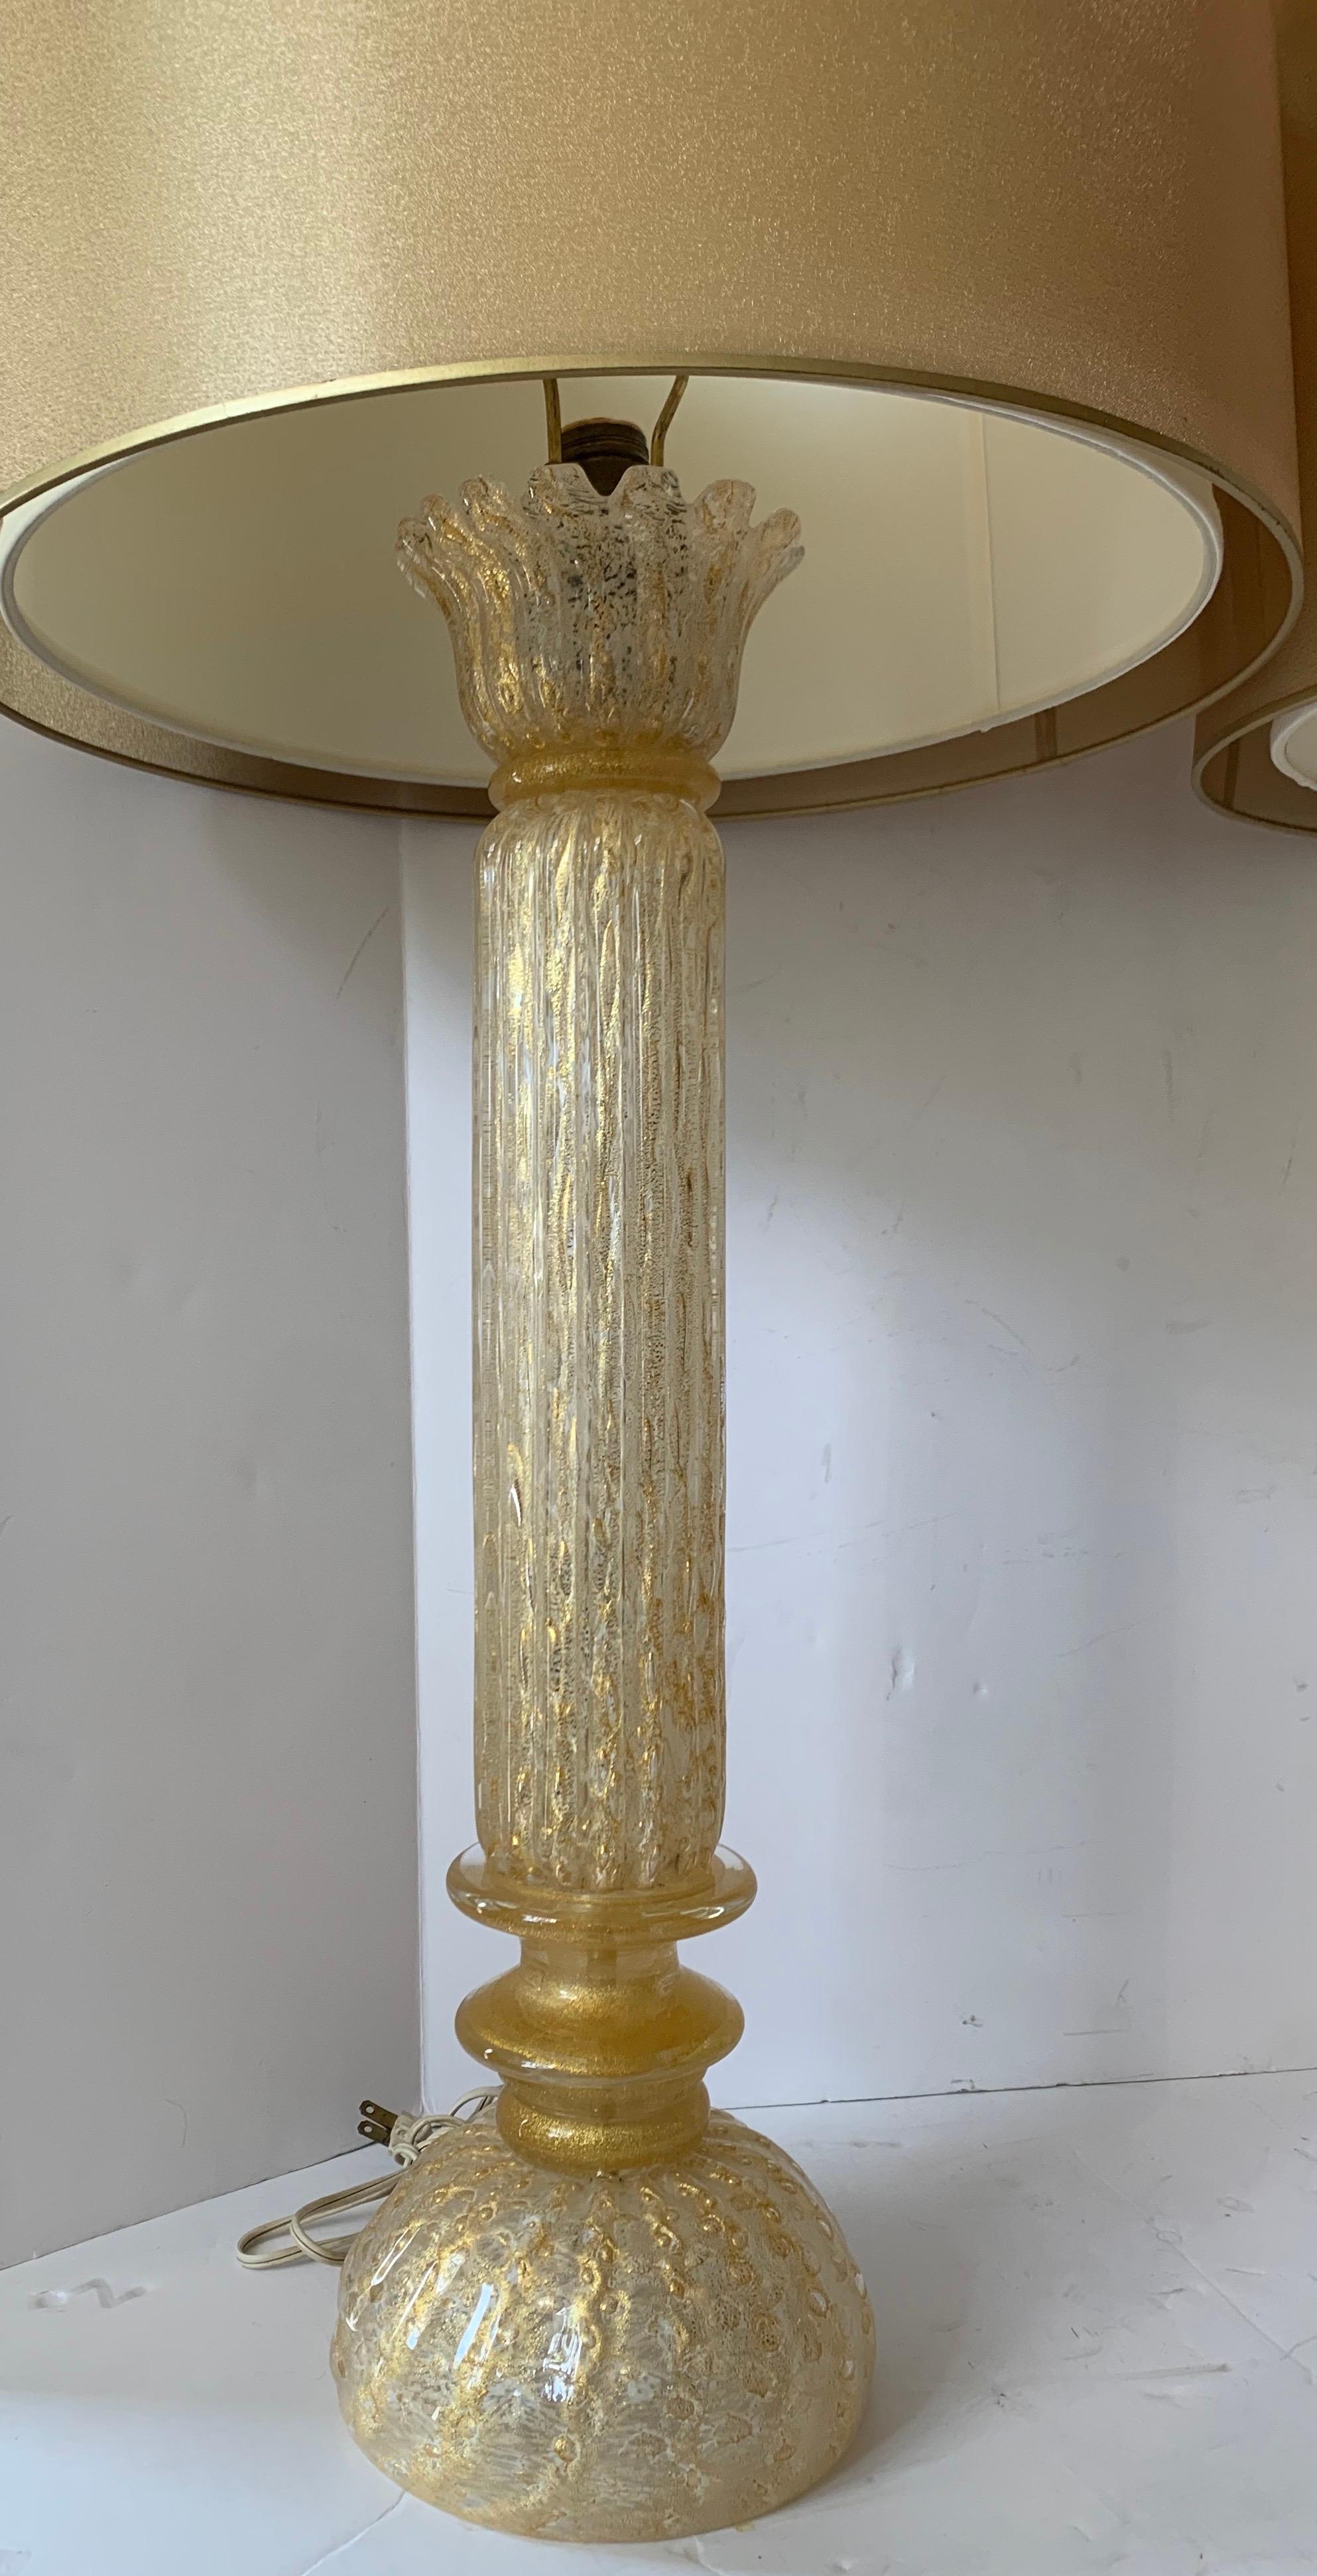 A wonderful pair of Mid-Century Modern Italian Murano Venetian gold flake table lamps accompanied by a beautiful pair of two layered gold shades.